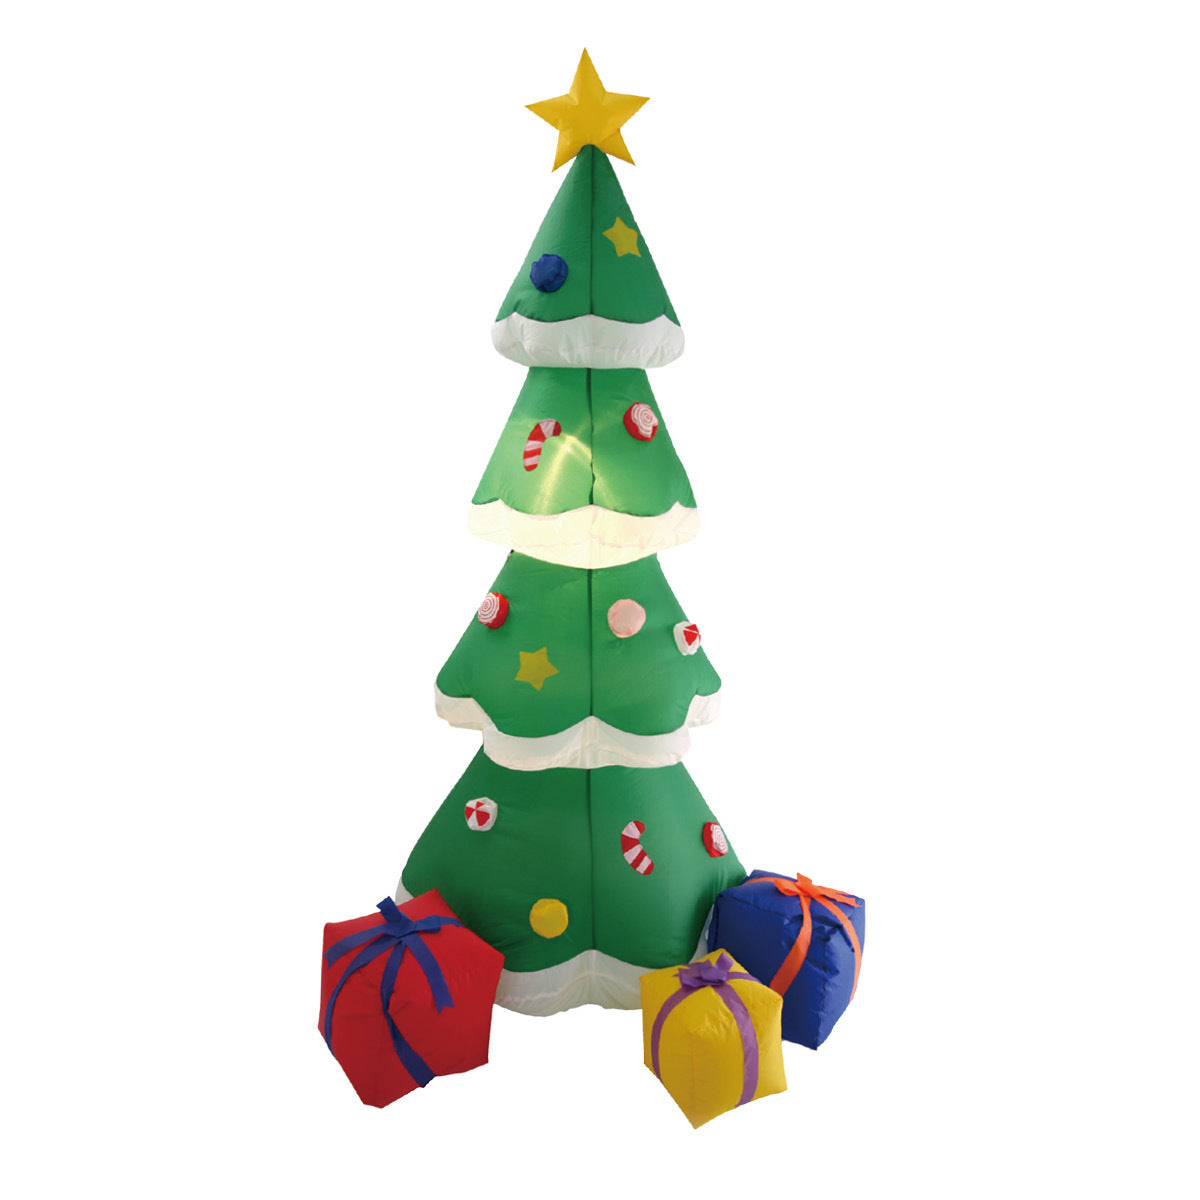 Christmas By Sas 1.8m Self Inflatable LED Tree With Presents Deals499